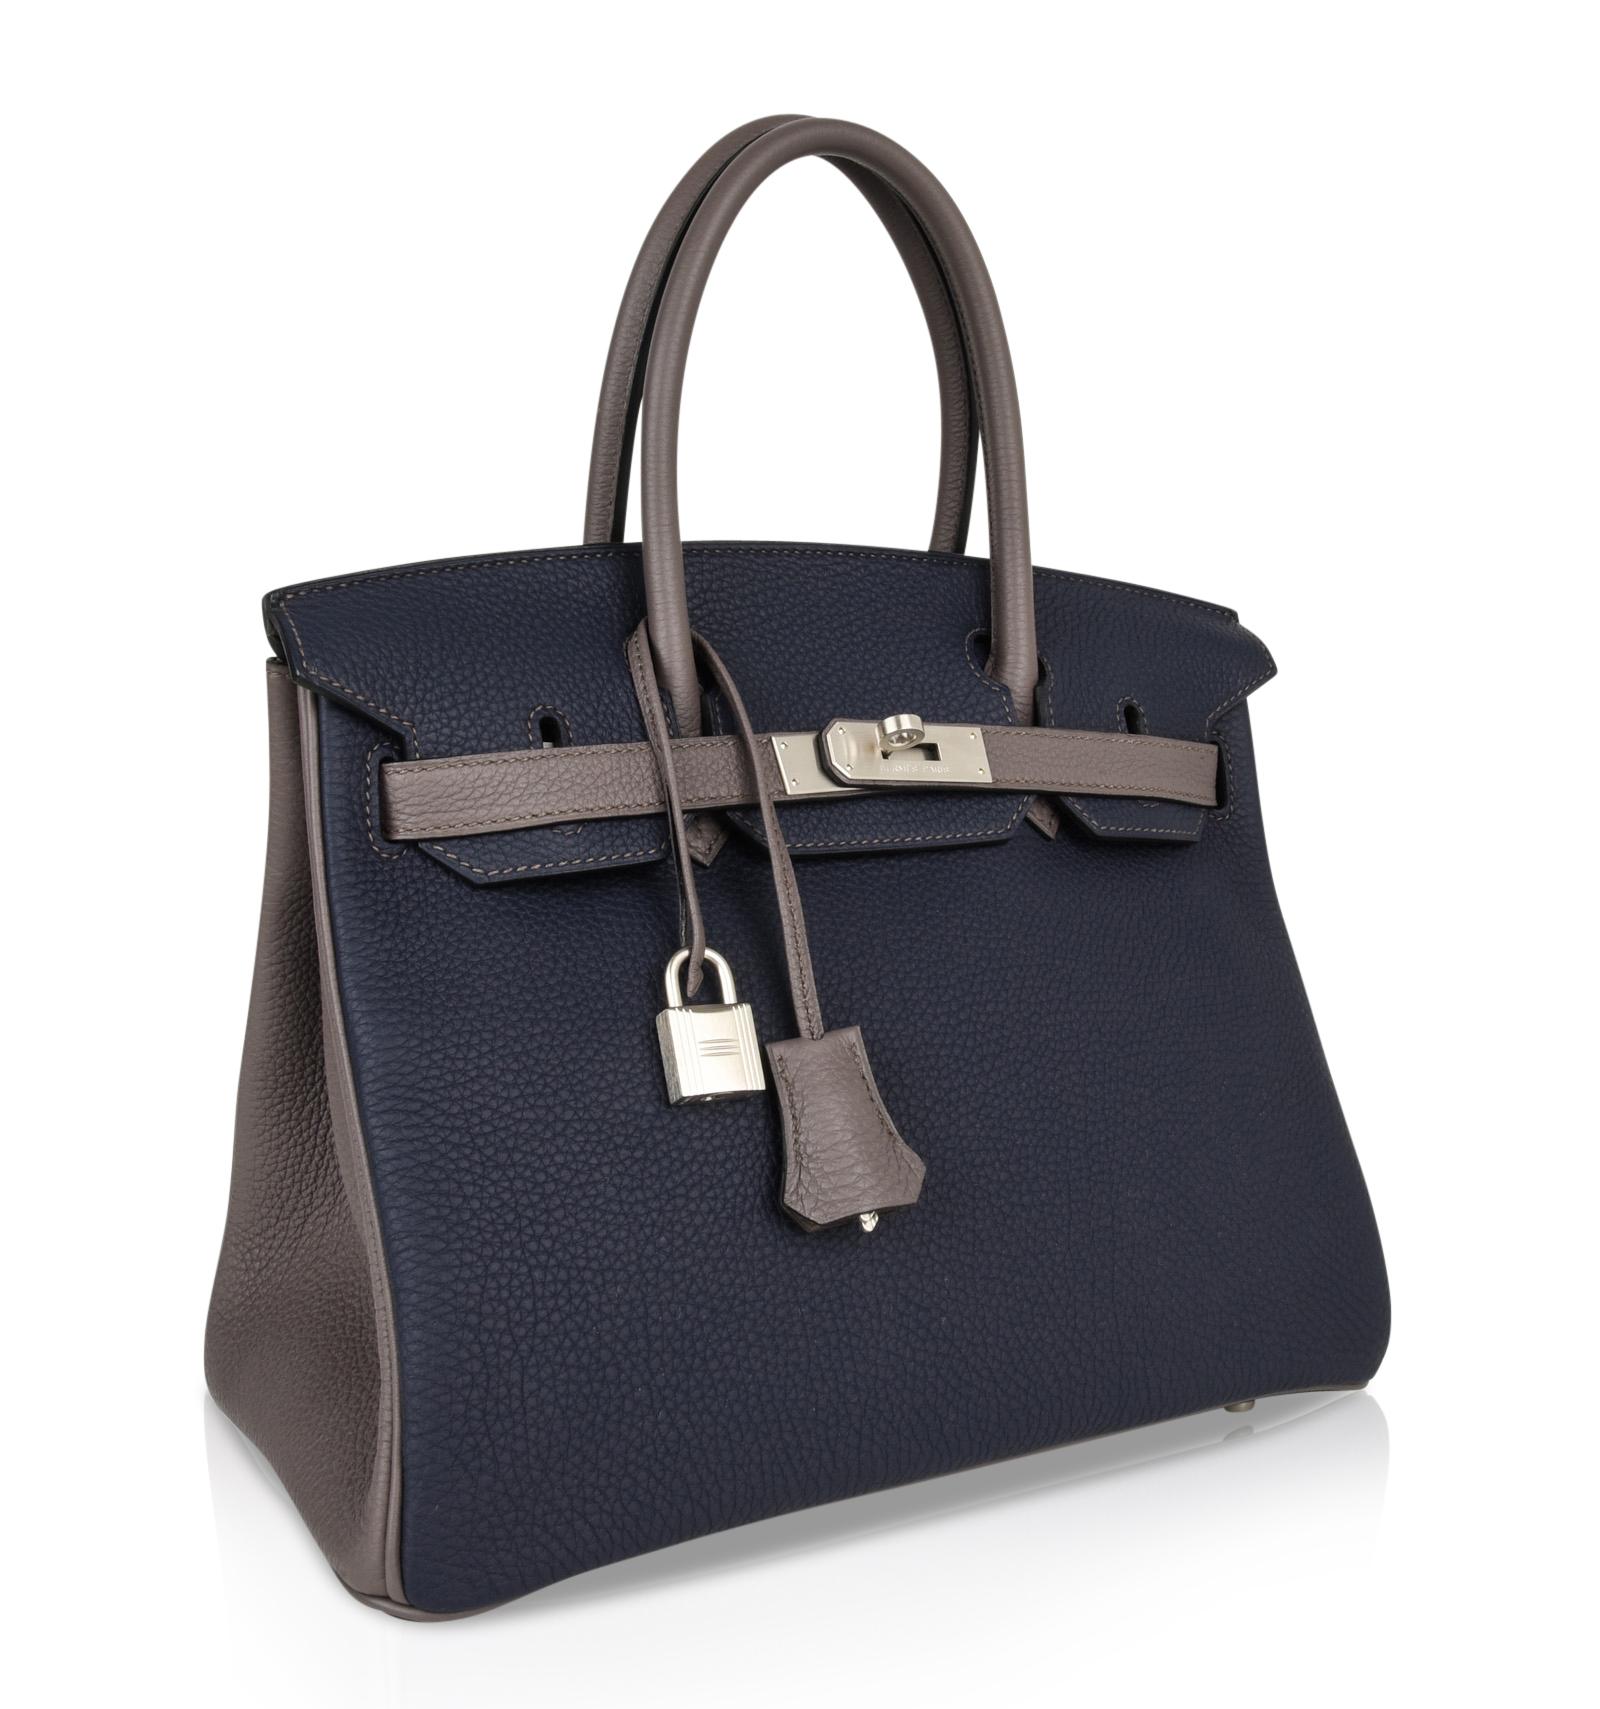 Mightychic offers an Hermes Birkin HSS 30 bag featured in understated elegance of Blue Nuit and Etain.
Rare brushed Palladium hardware completes this beautiful special order chic bag.
Togo leather.
NEW or NEVER WORN. 
Plastic is not on the hardware.